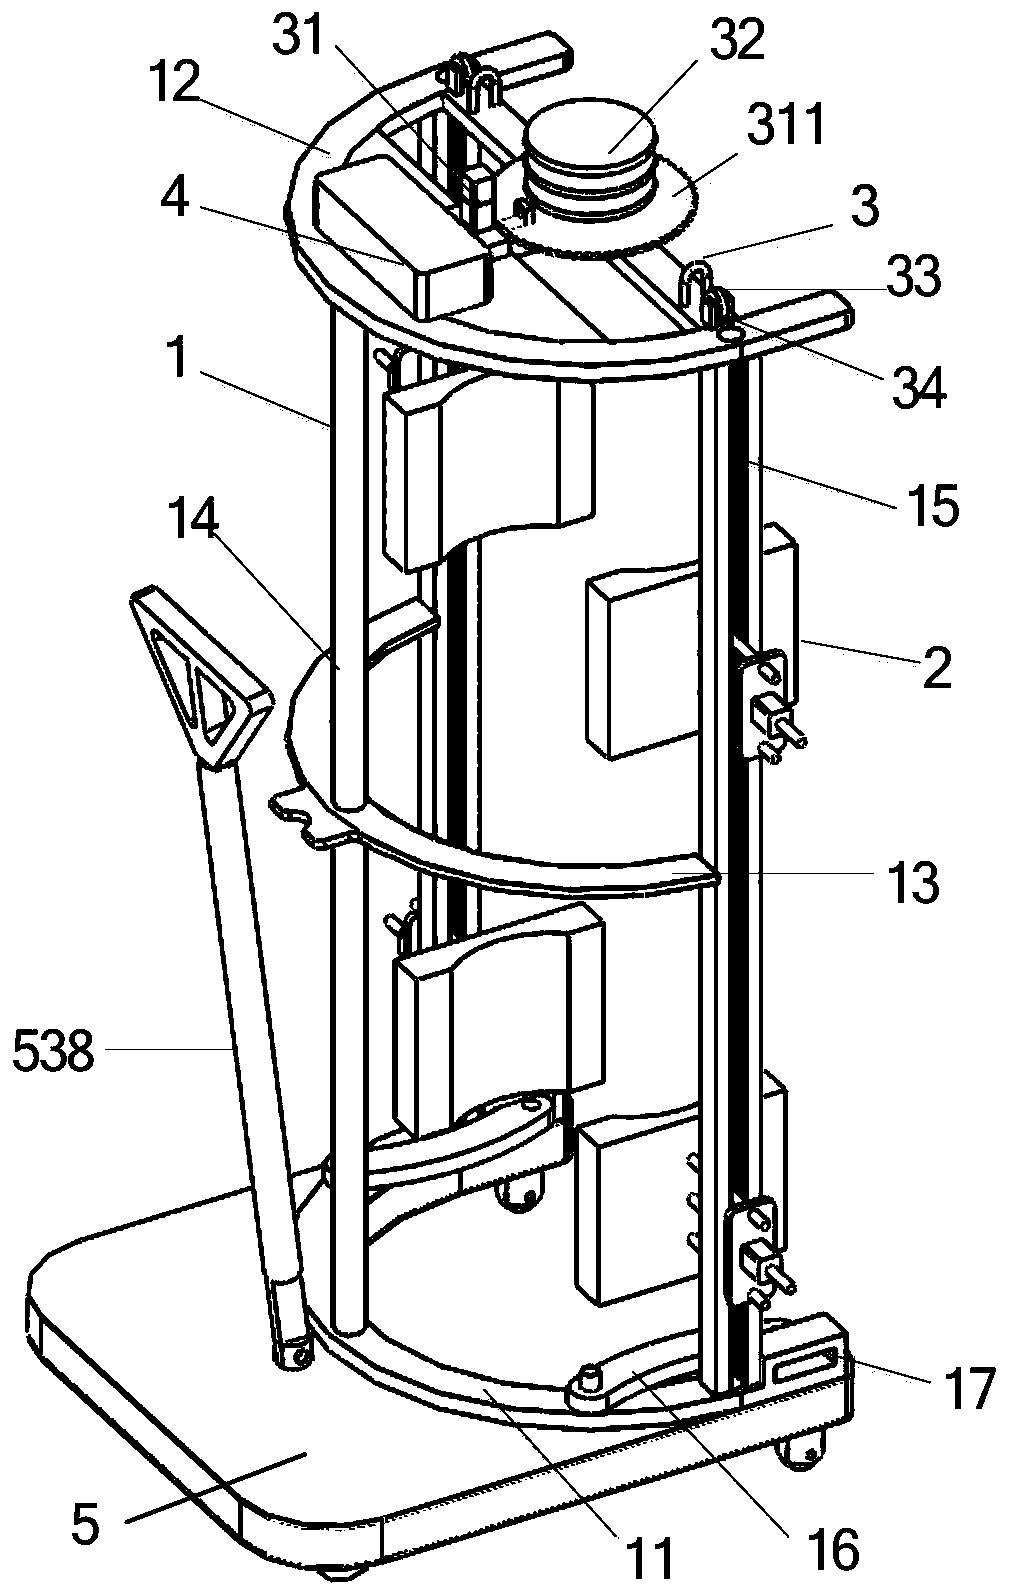 An oil drum handling device with a mobile platform